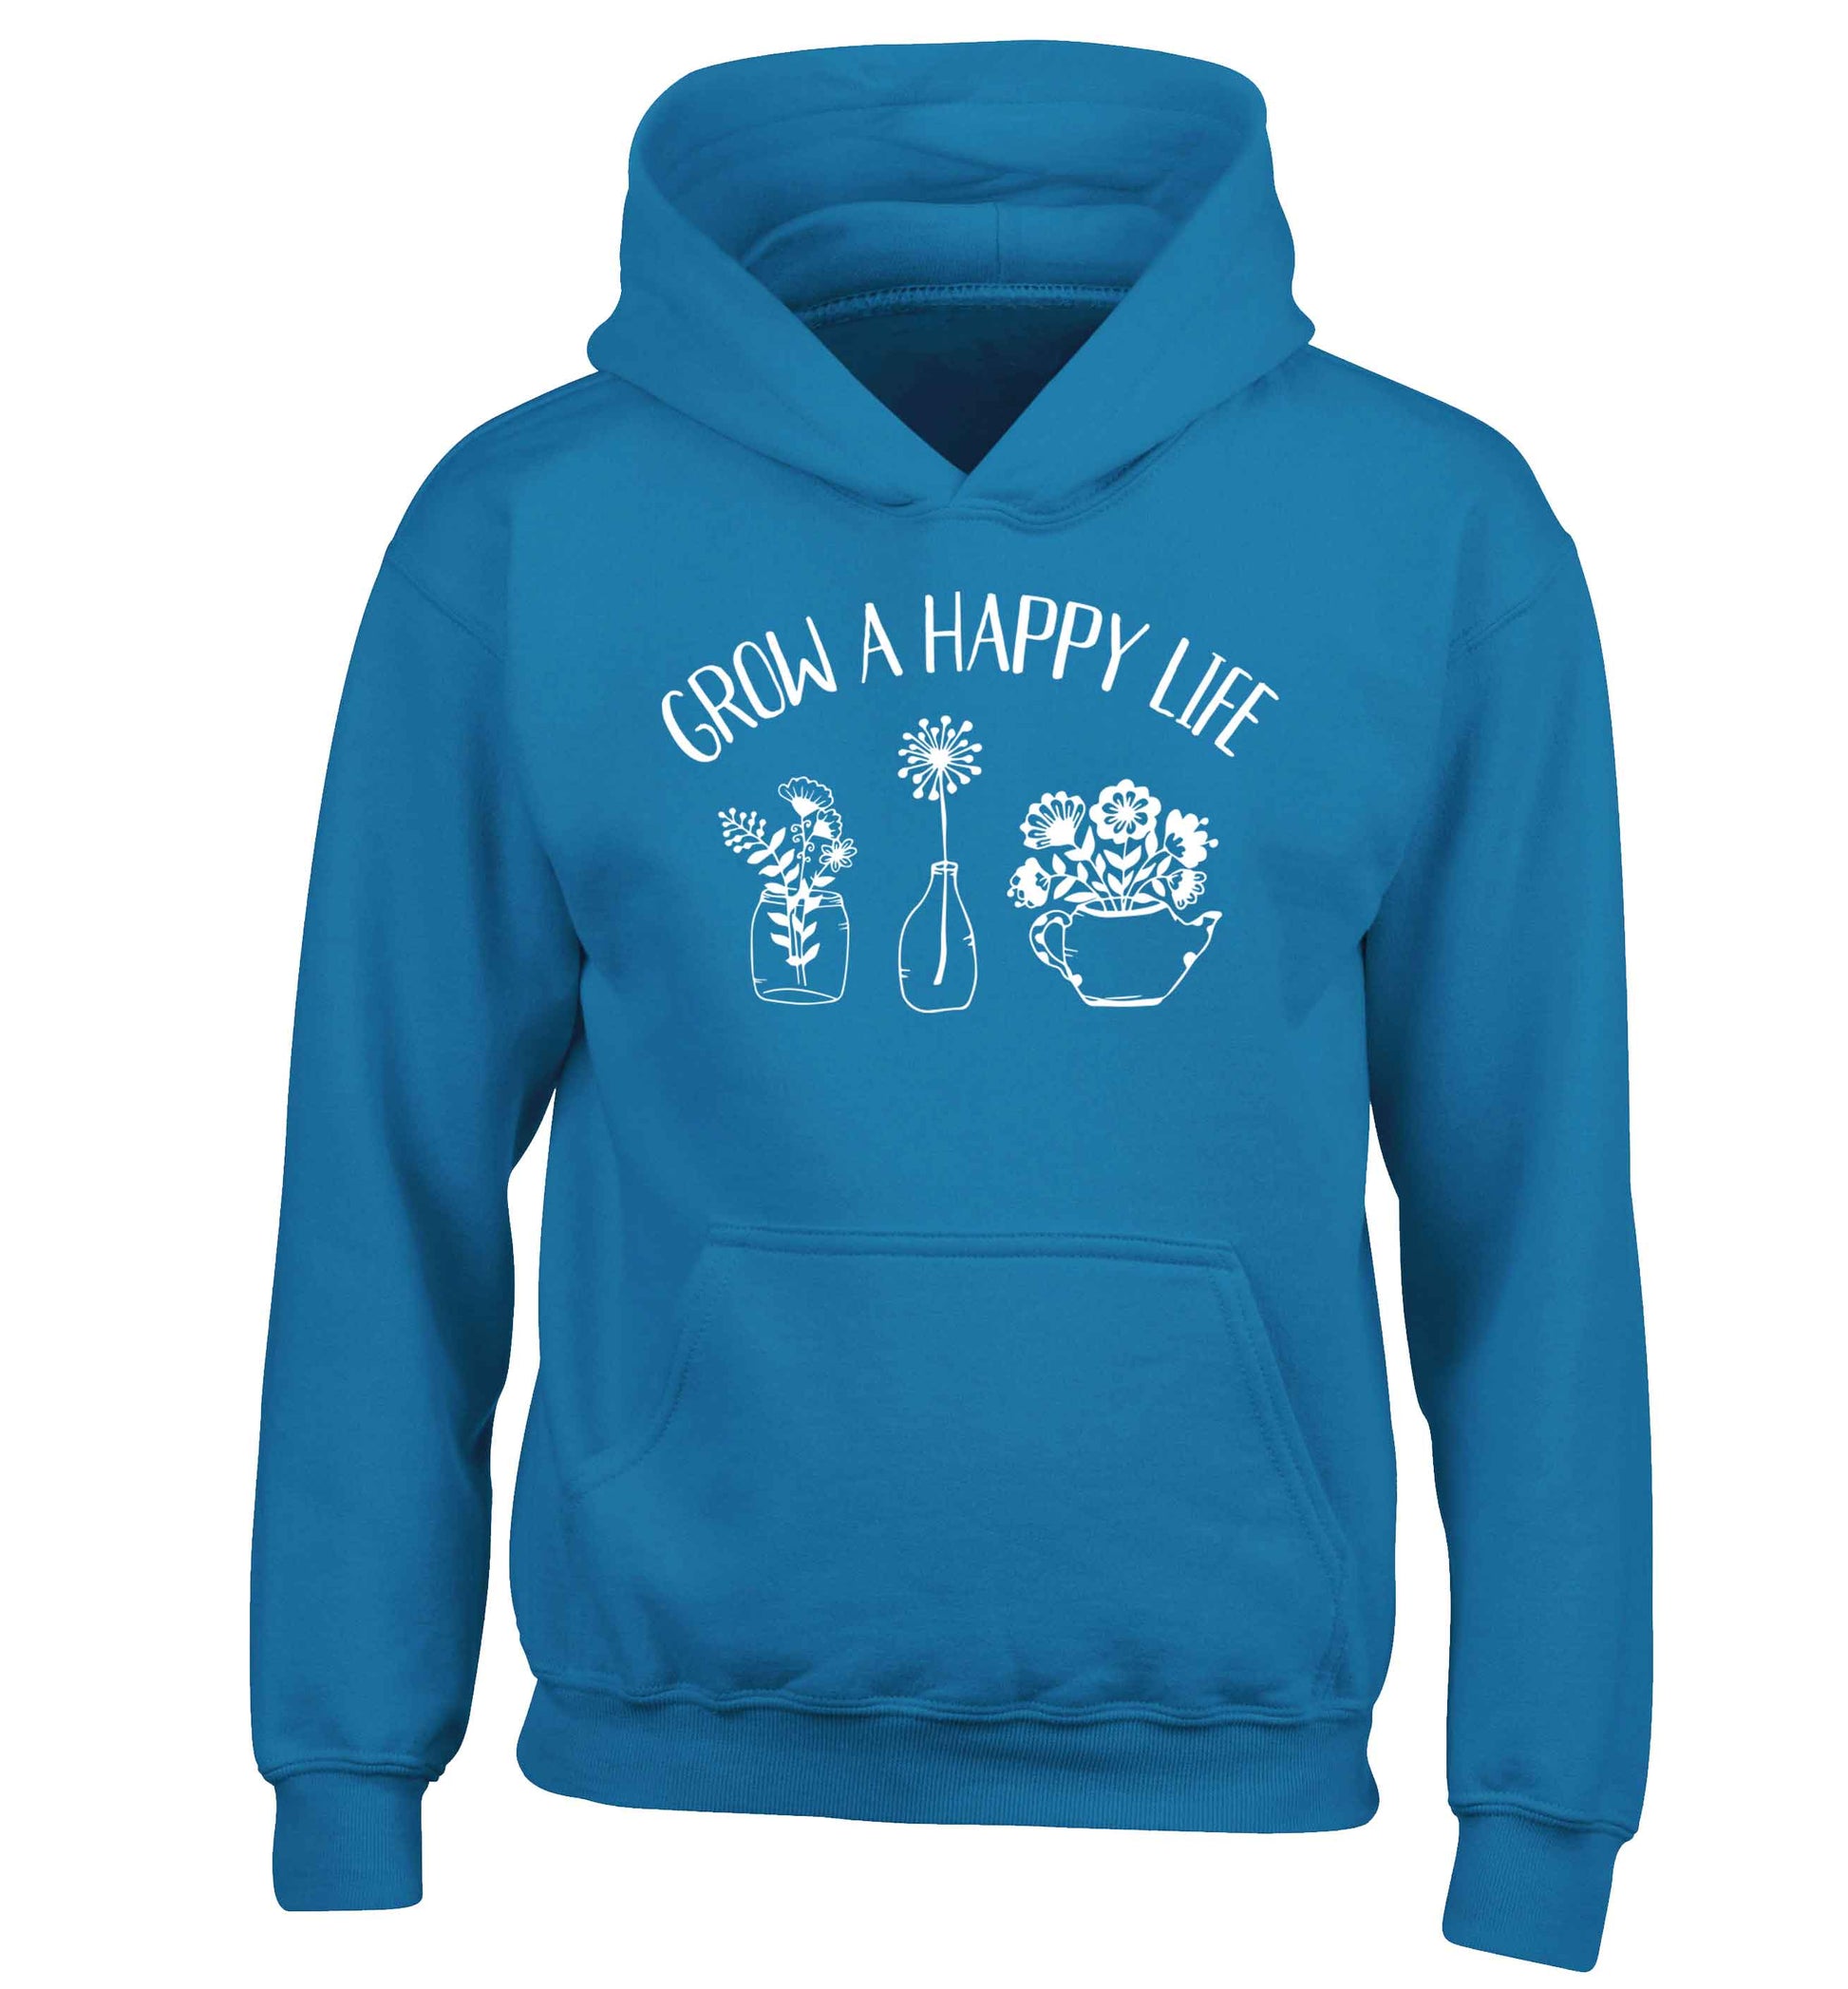 Grow a happy life children's blue hoodie 12-13 Years